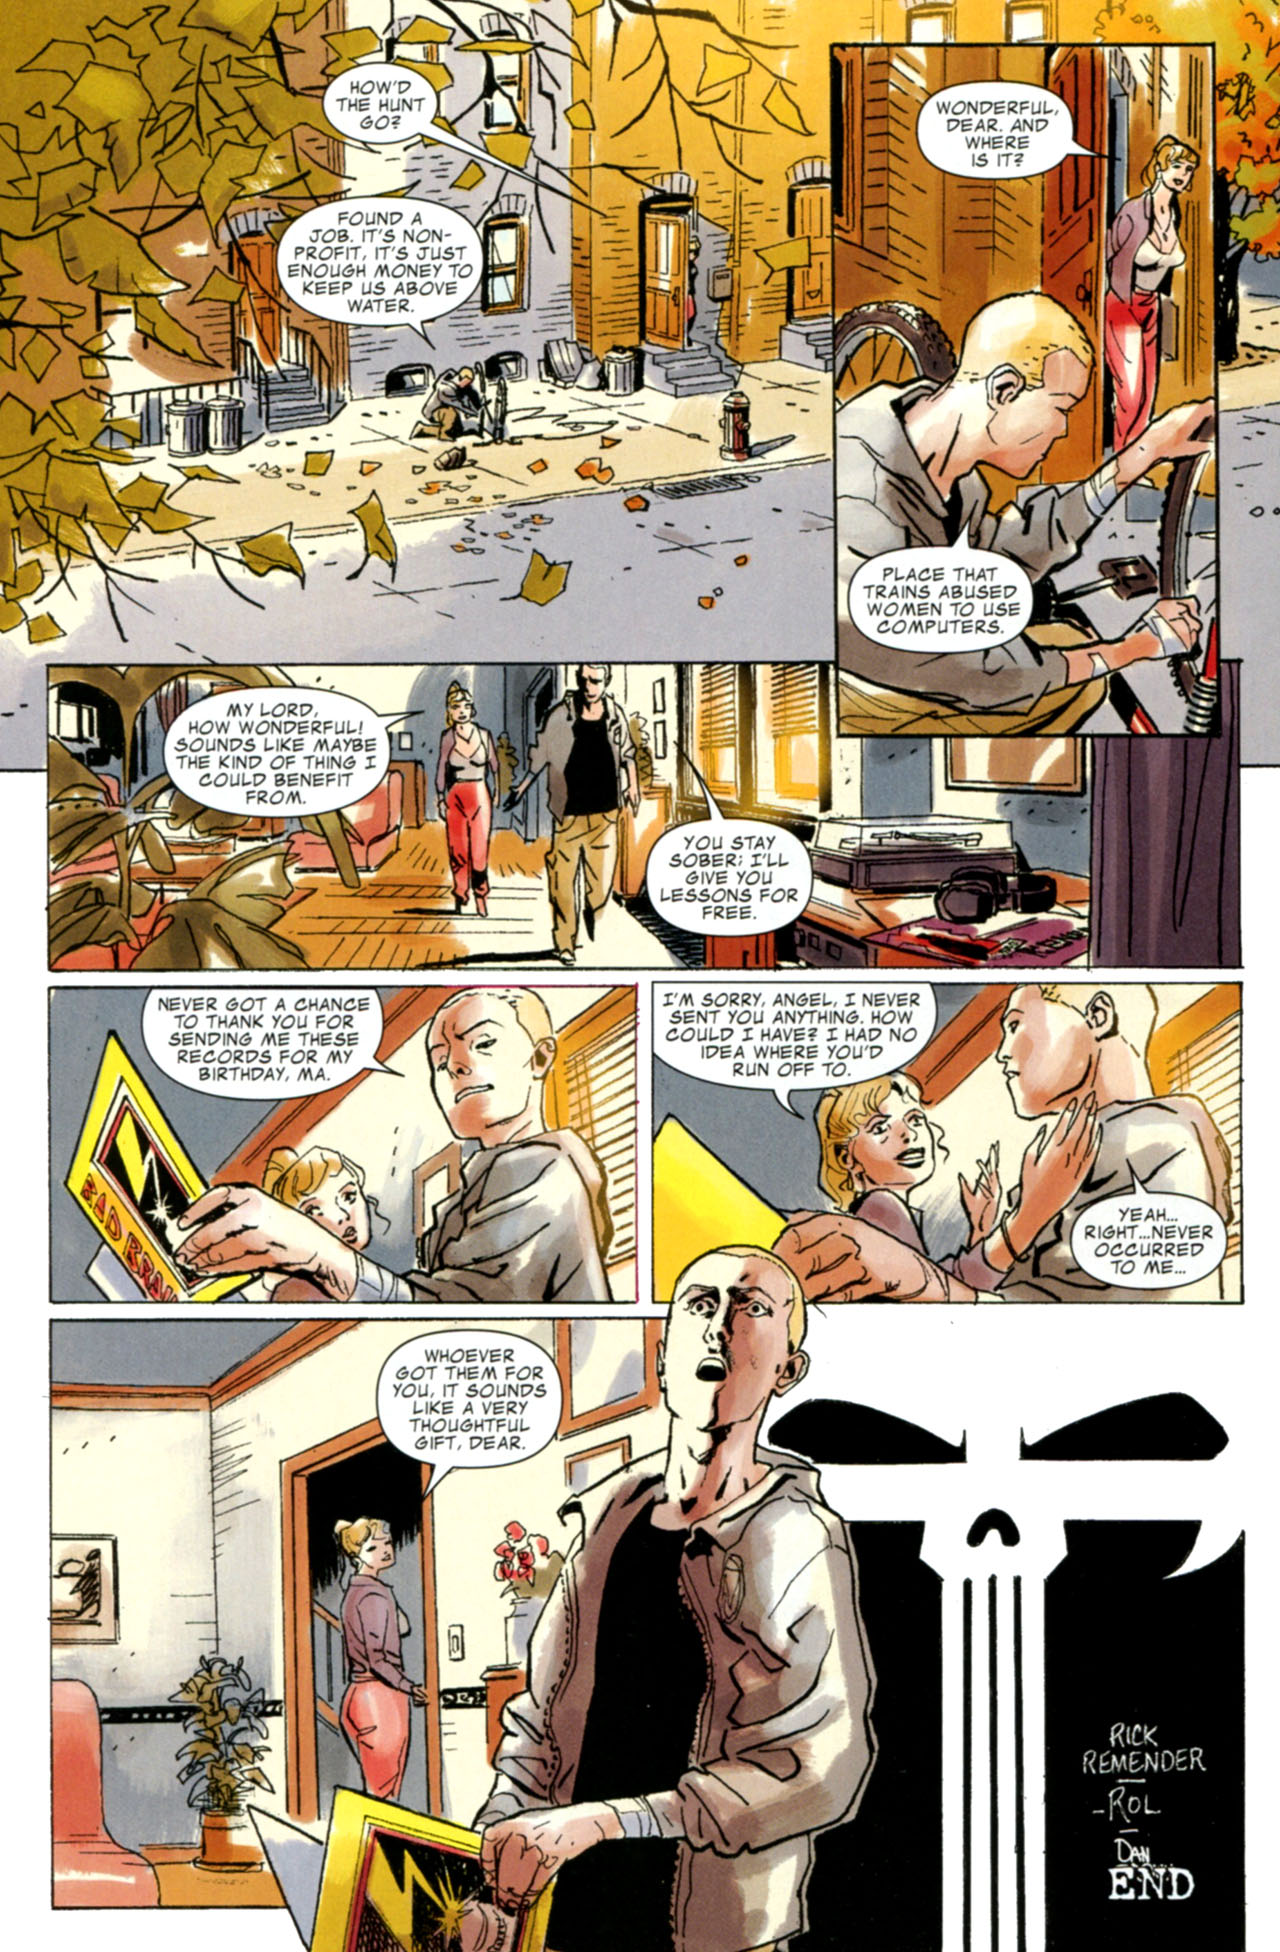 Punisher: In The Blood #5 - In the Blood, Part Five: Conclusion